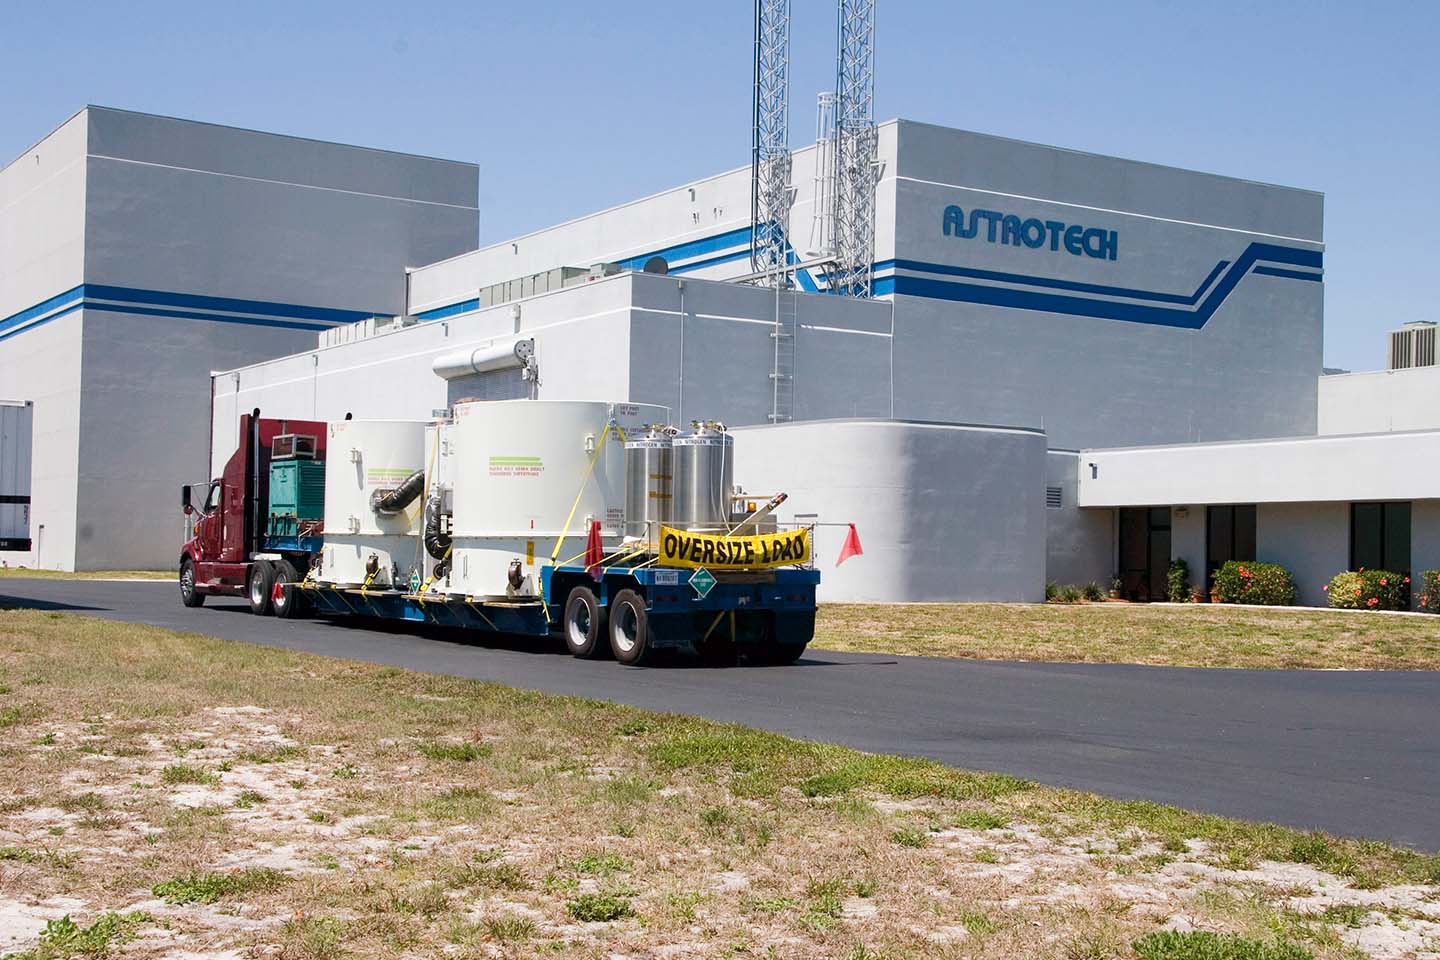 NASA's twin STEREO (Solar TErrestrial RElations Observatory) spacecraft, designed and built by APL, arrived by truck at the Astrotech Spacecraft Processing Facility